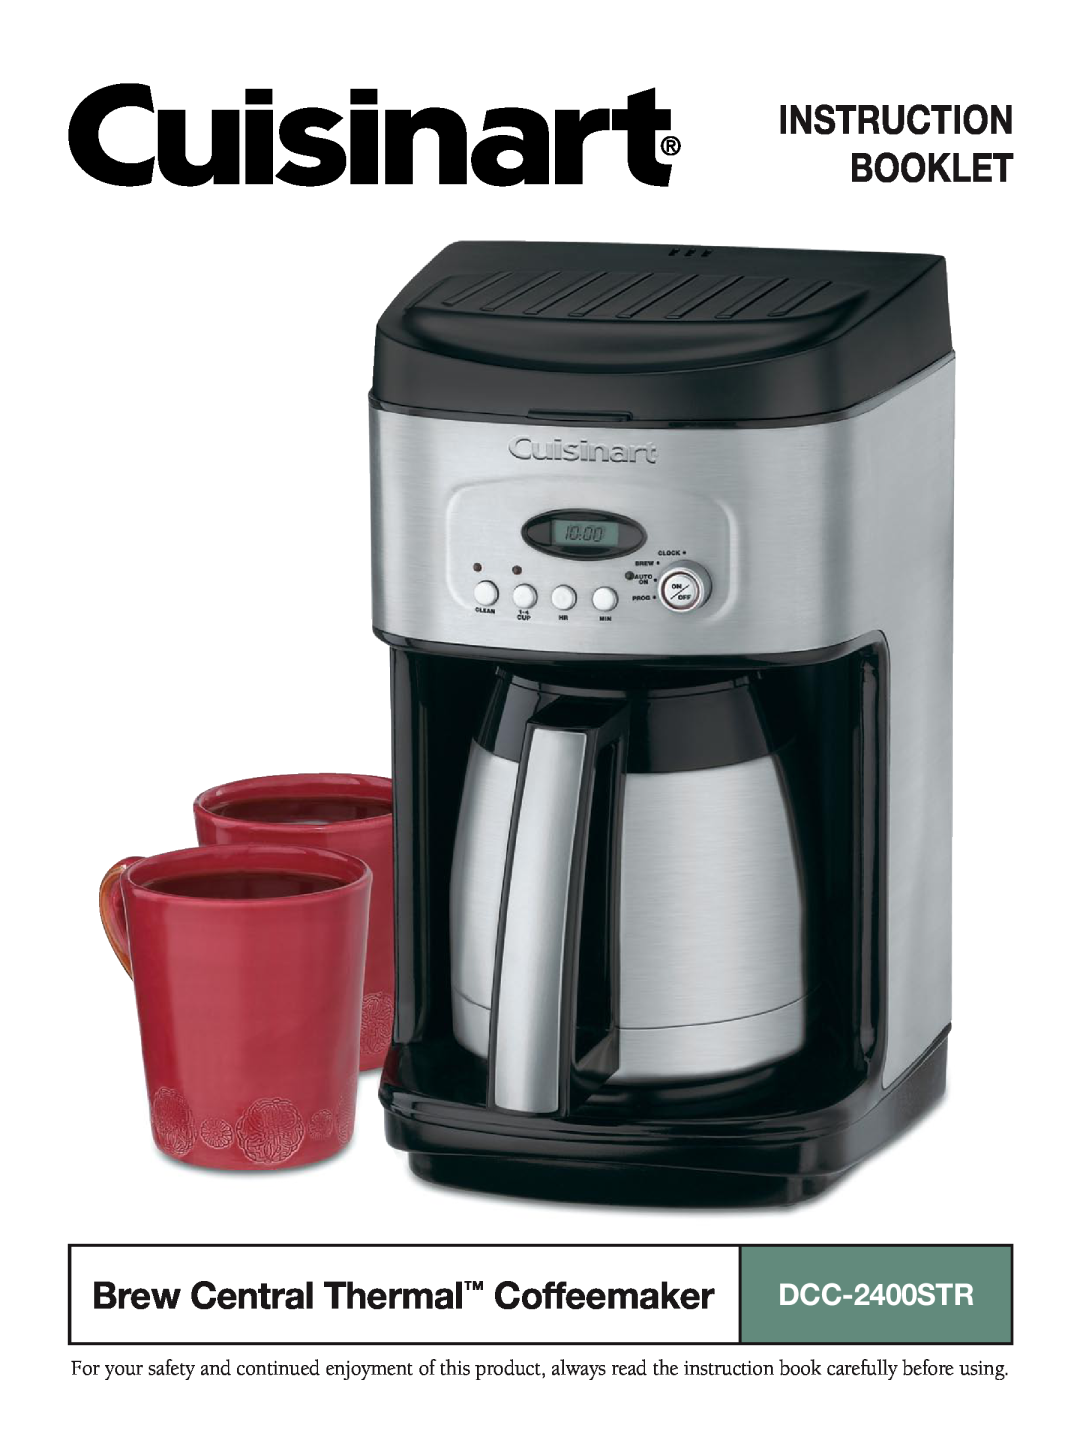 Cuisinart DCC-2400STR manual Instruction Booklet, Brew Central Thermal Coffeemaker 